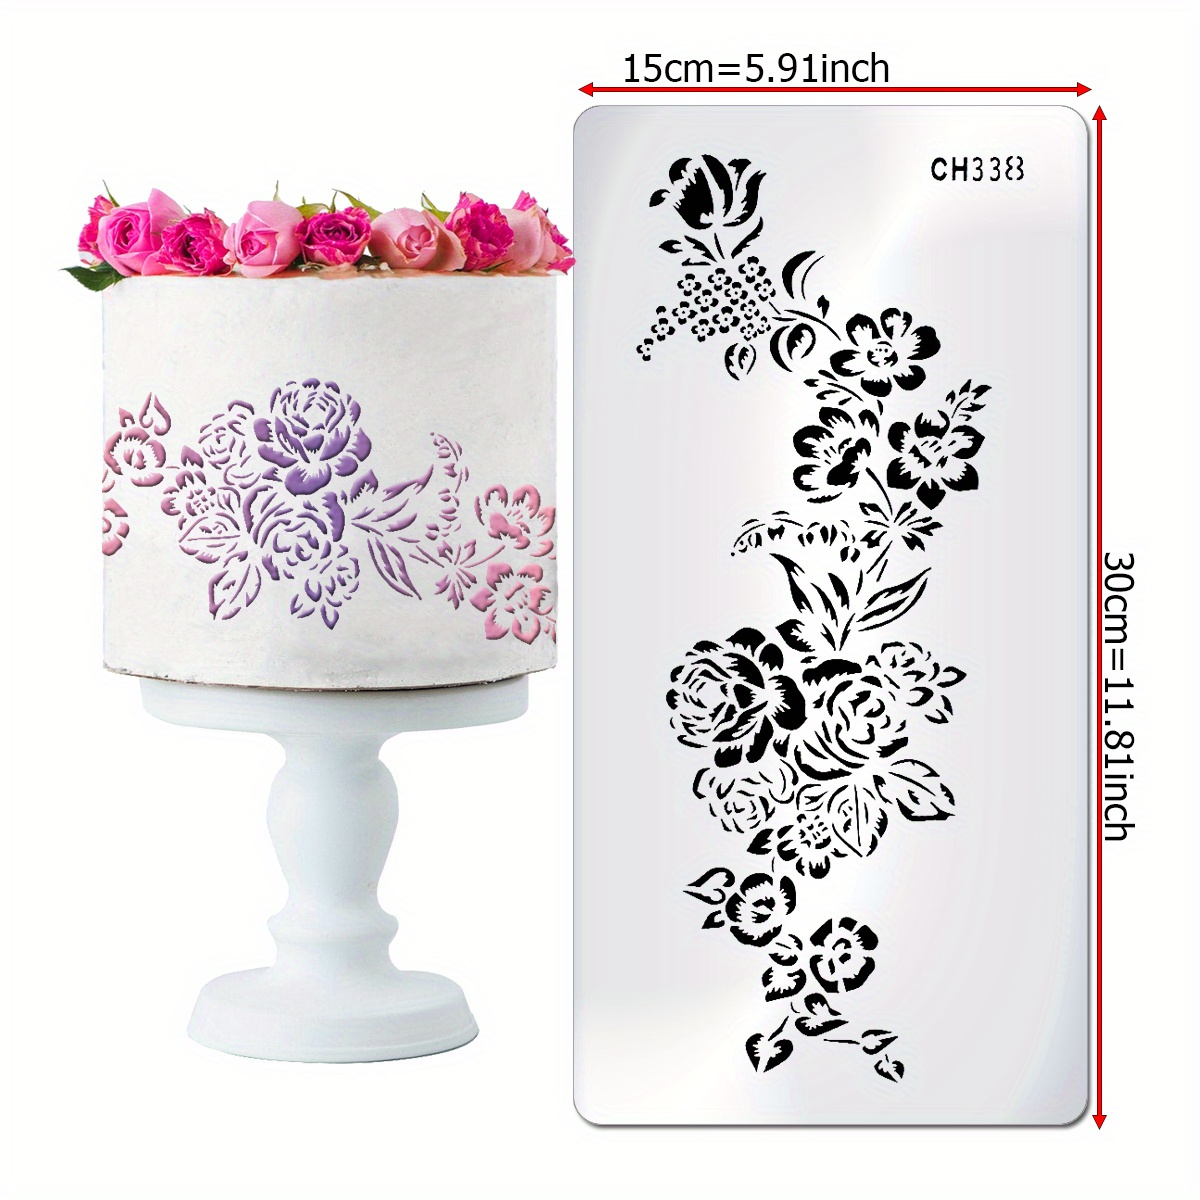 OOKWE Cake Mesh Stencil Lace Flower Grass Fabric Cake Stencil Decorating  Tool 